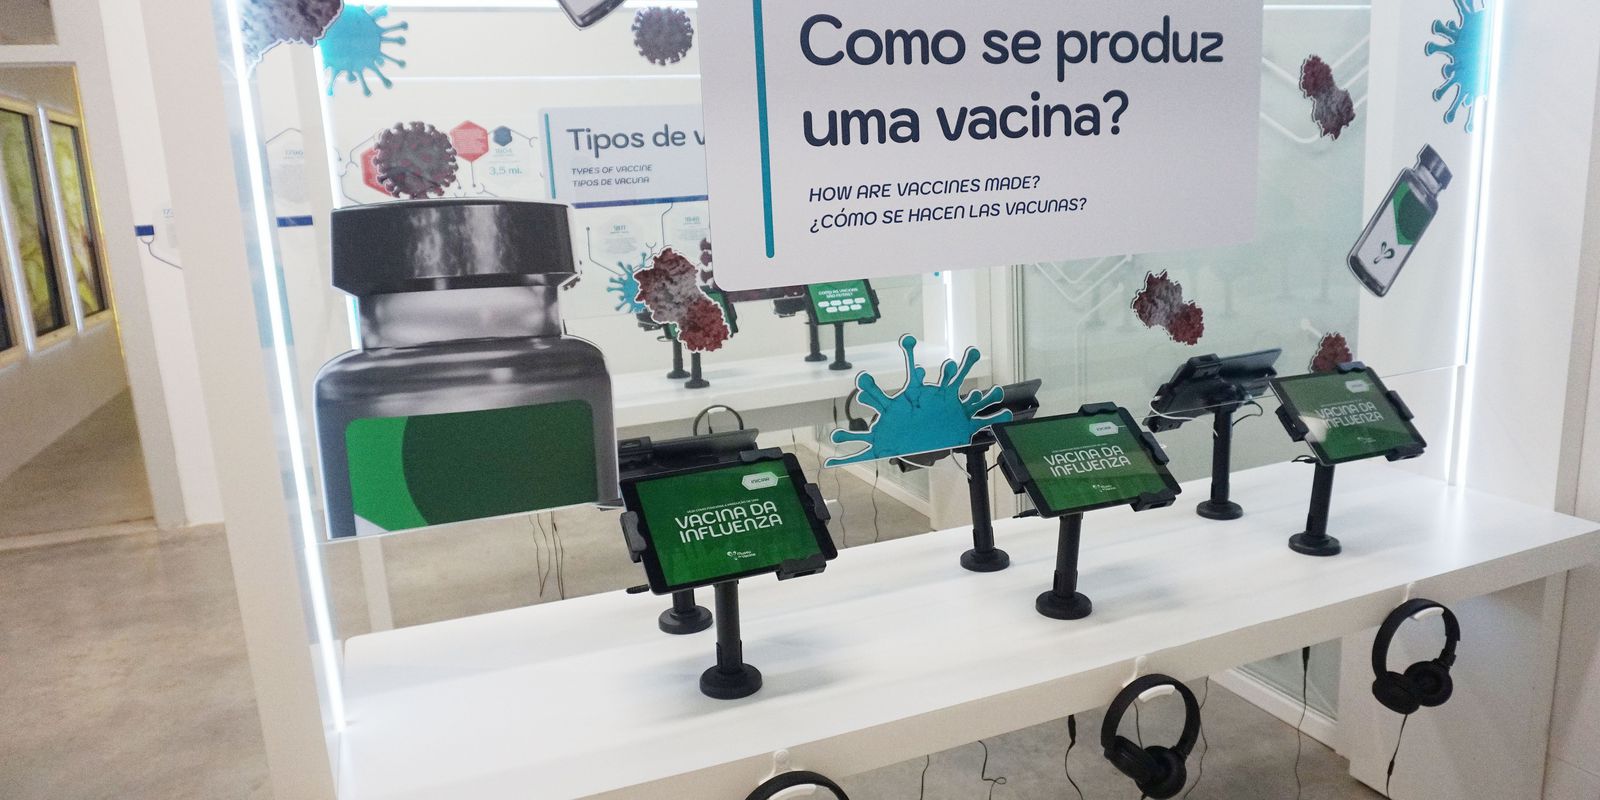 São Paulo opens museum and launches website that answers questions about vaccination